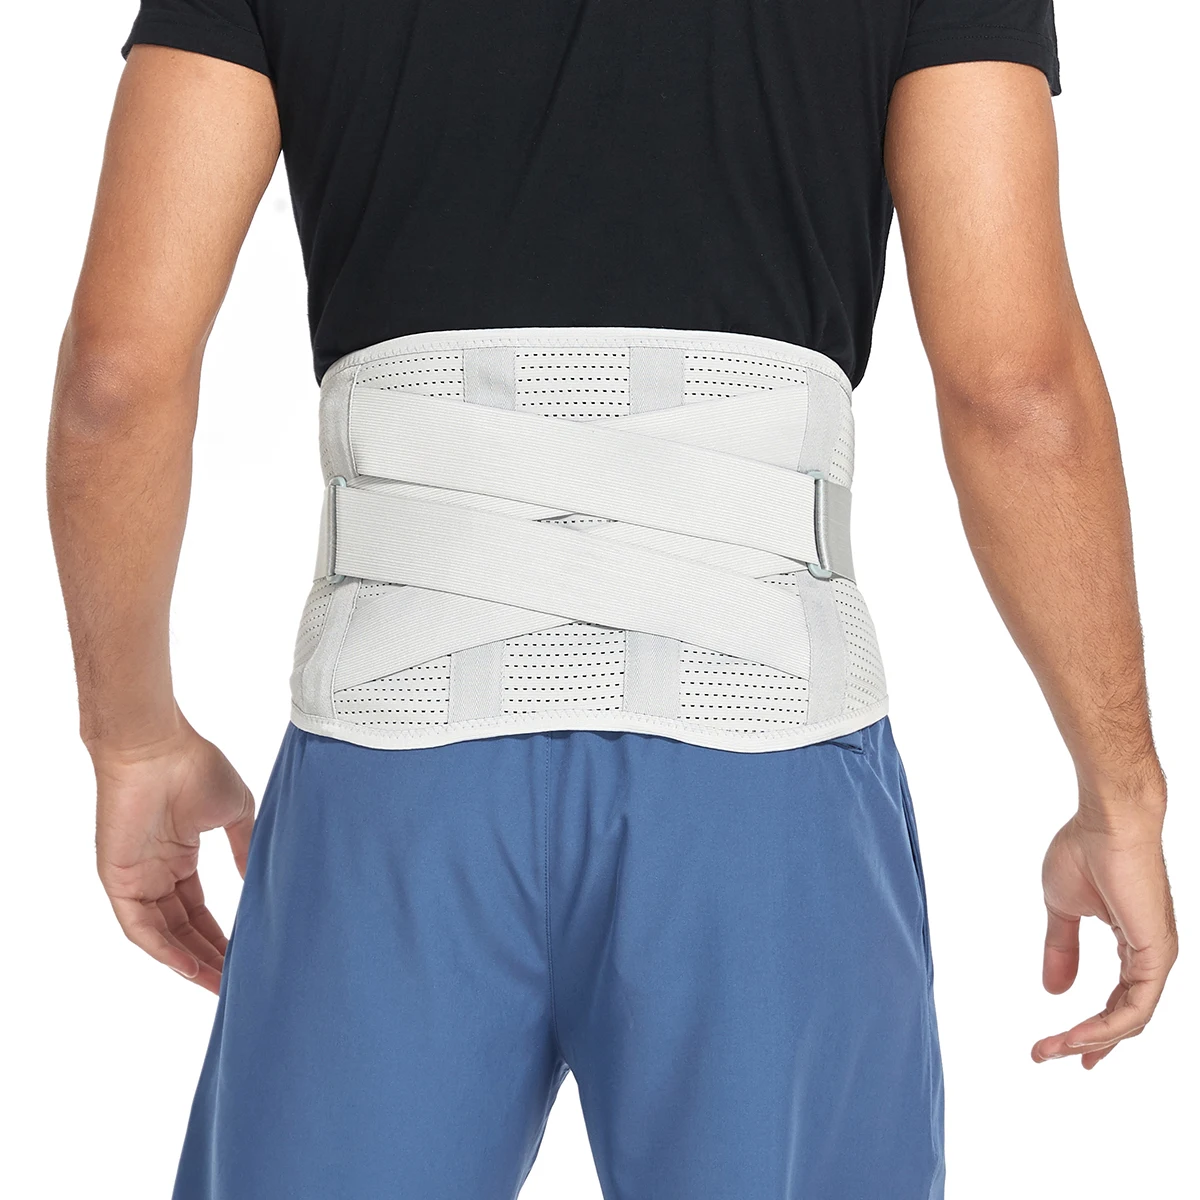 Back Brace for Men Breathable Waist Shapers Lumbar Lower Back Support Belt Herniated Disc Back Pain Relief Heavy Lifting multifunctional waist abdomen massager hot compresses dysmenorrhoea massage device health care back abdominal pain relief belts